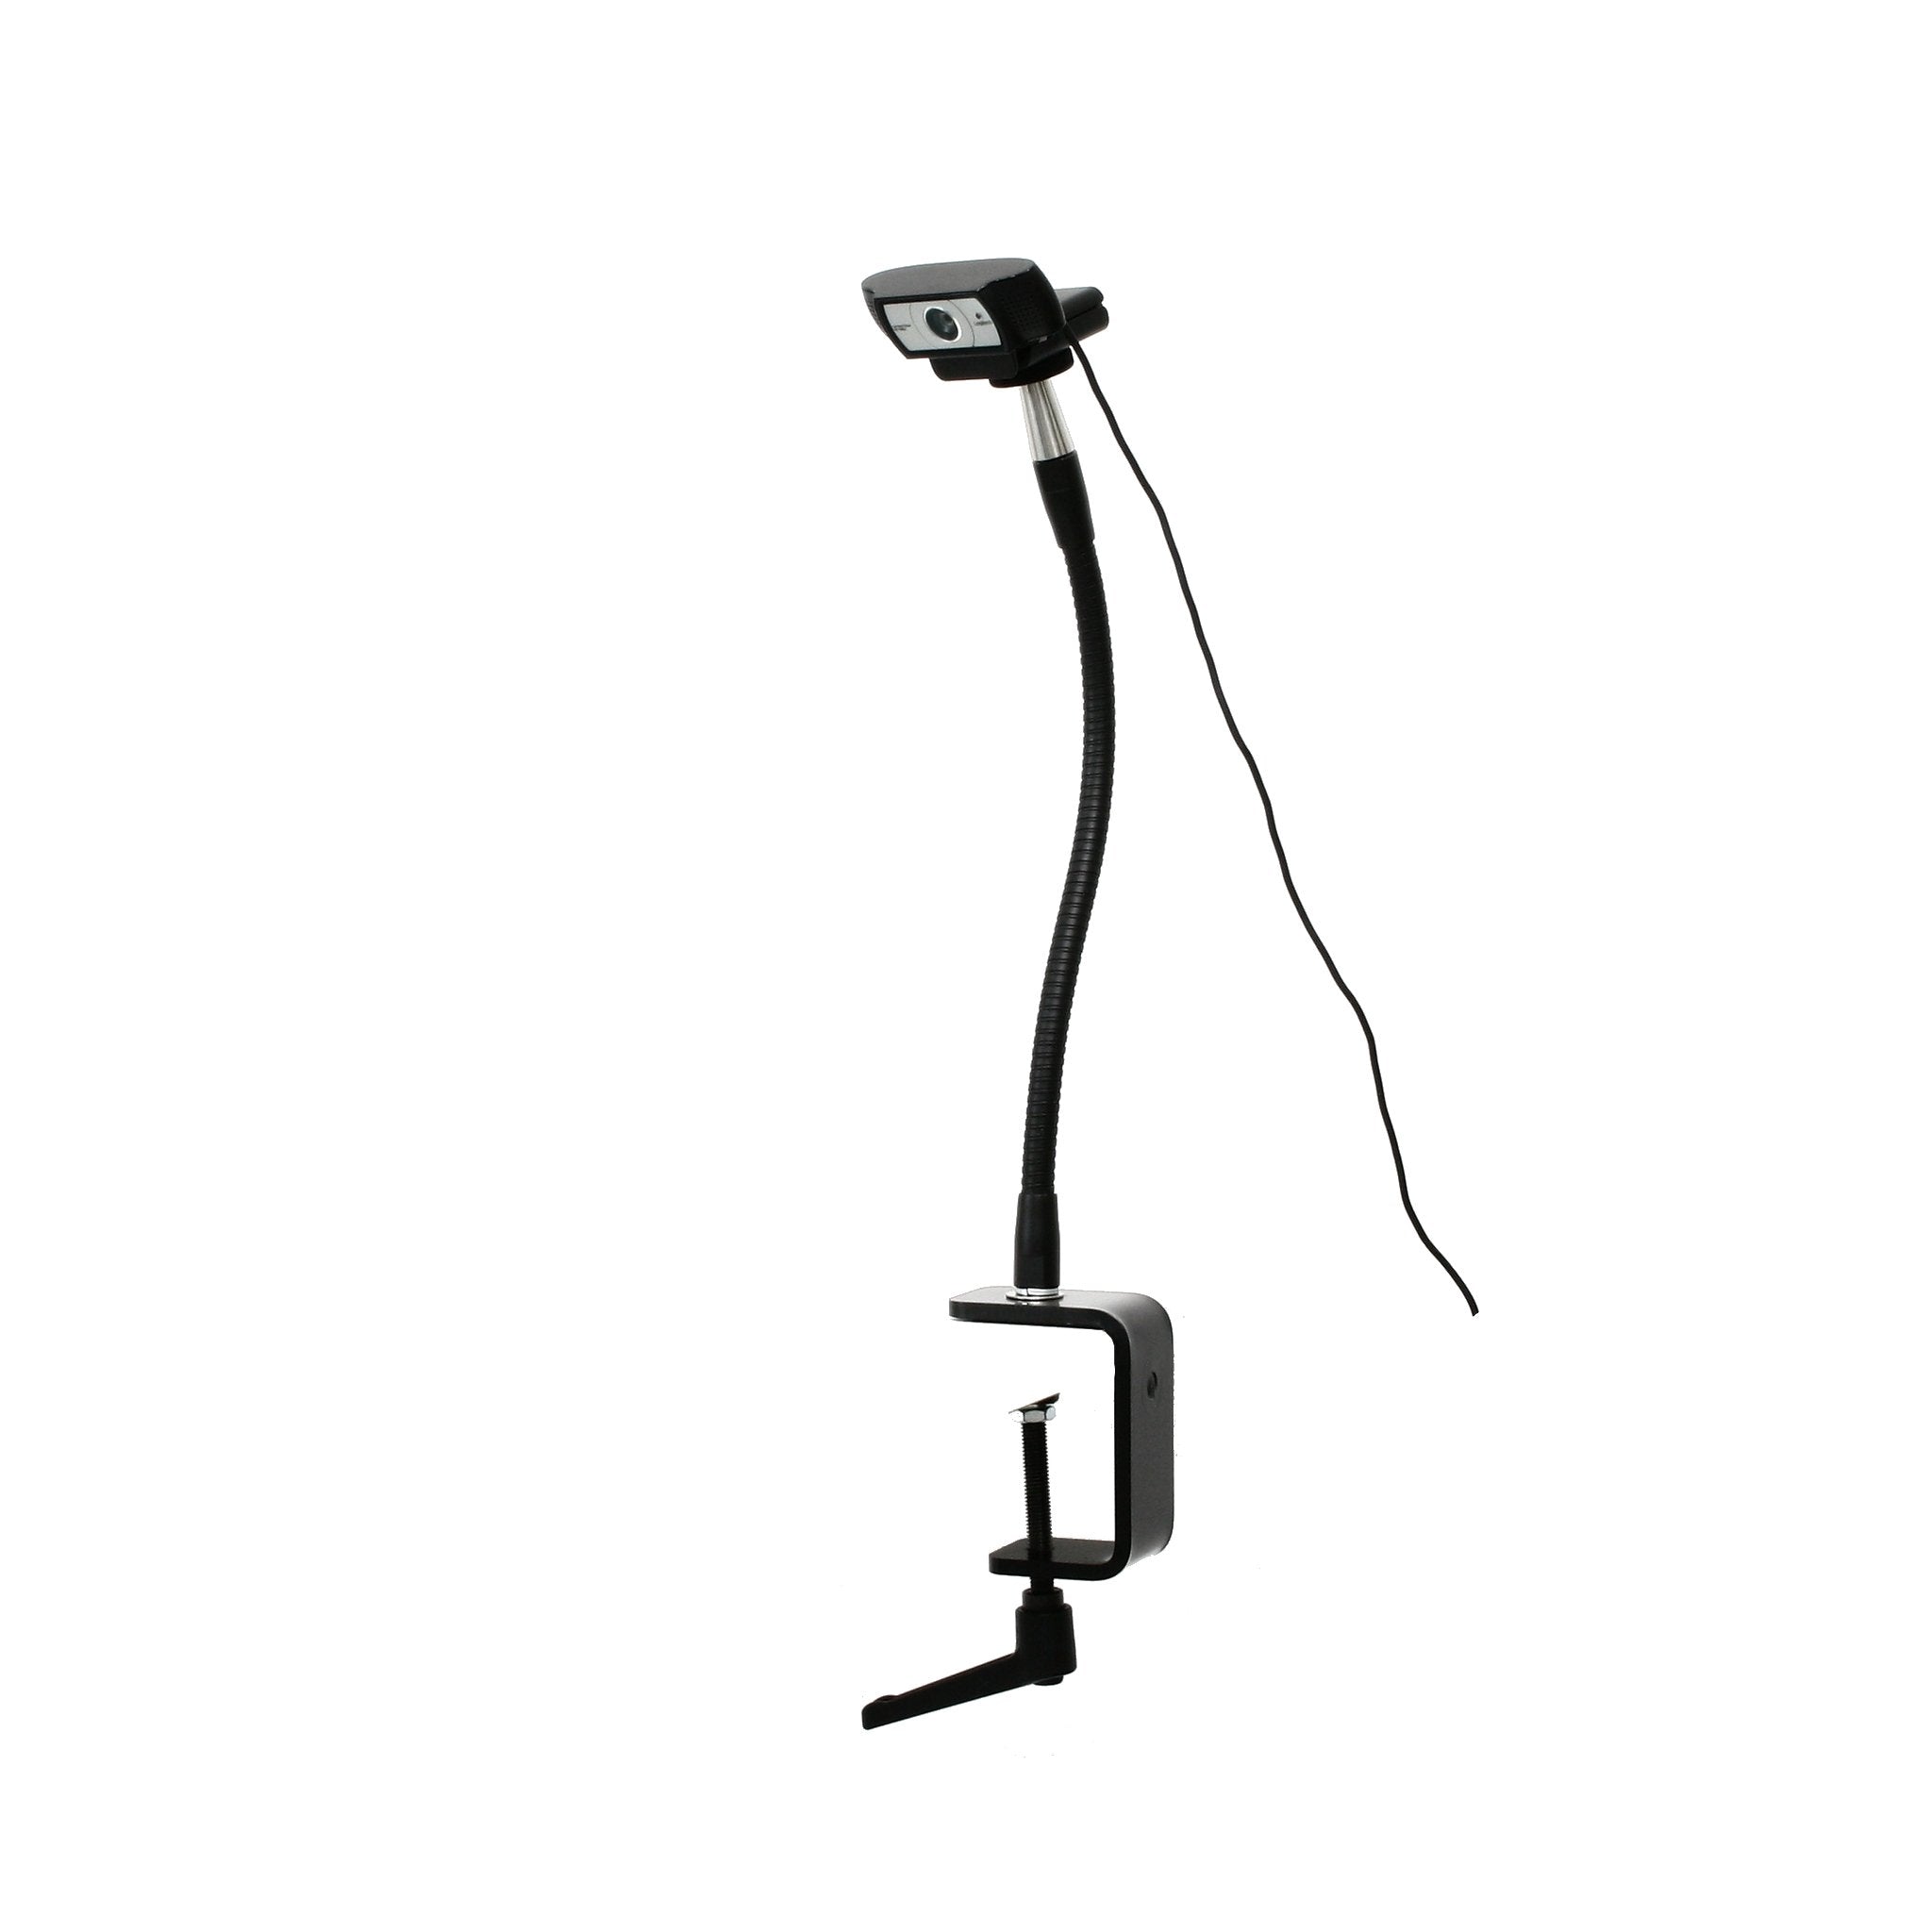 SnakeClamp 13 Flexible Arm Webcam Stand with Angle Mount